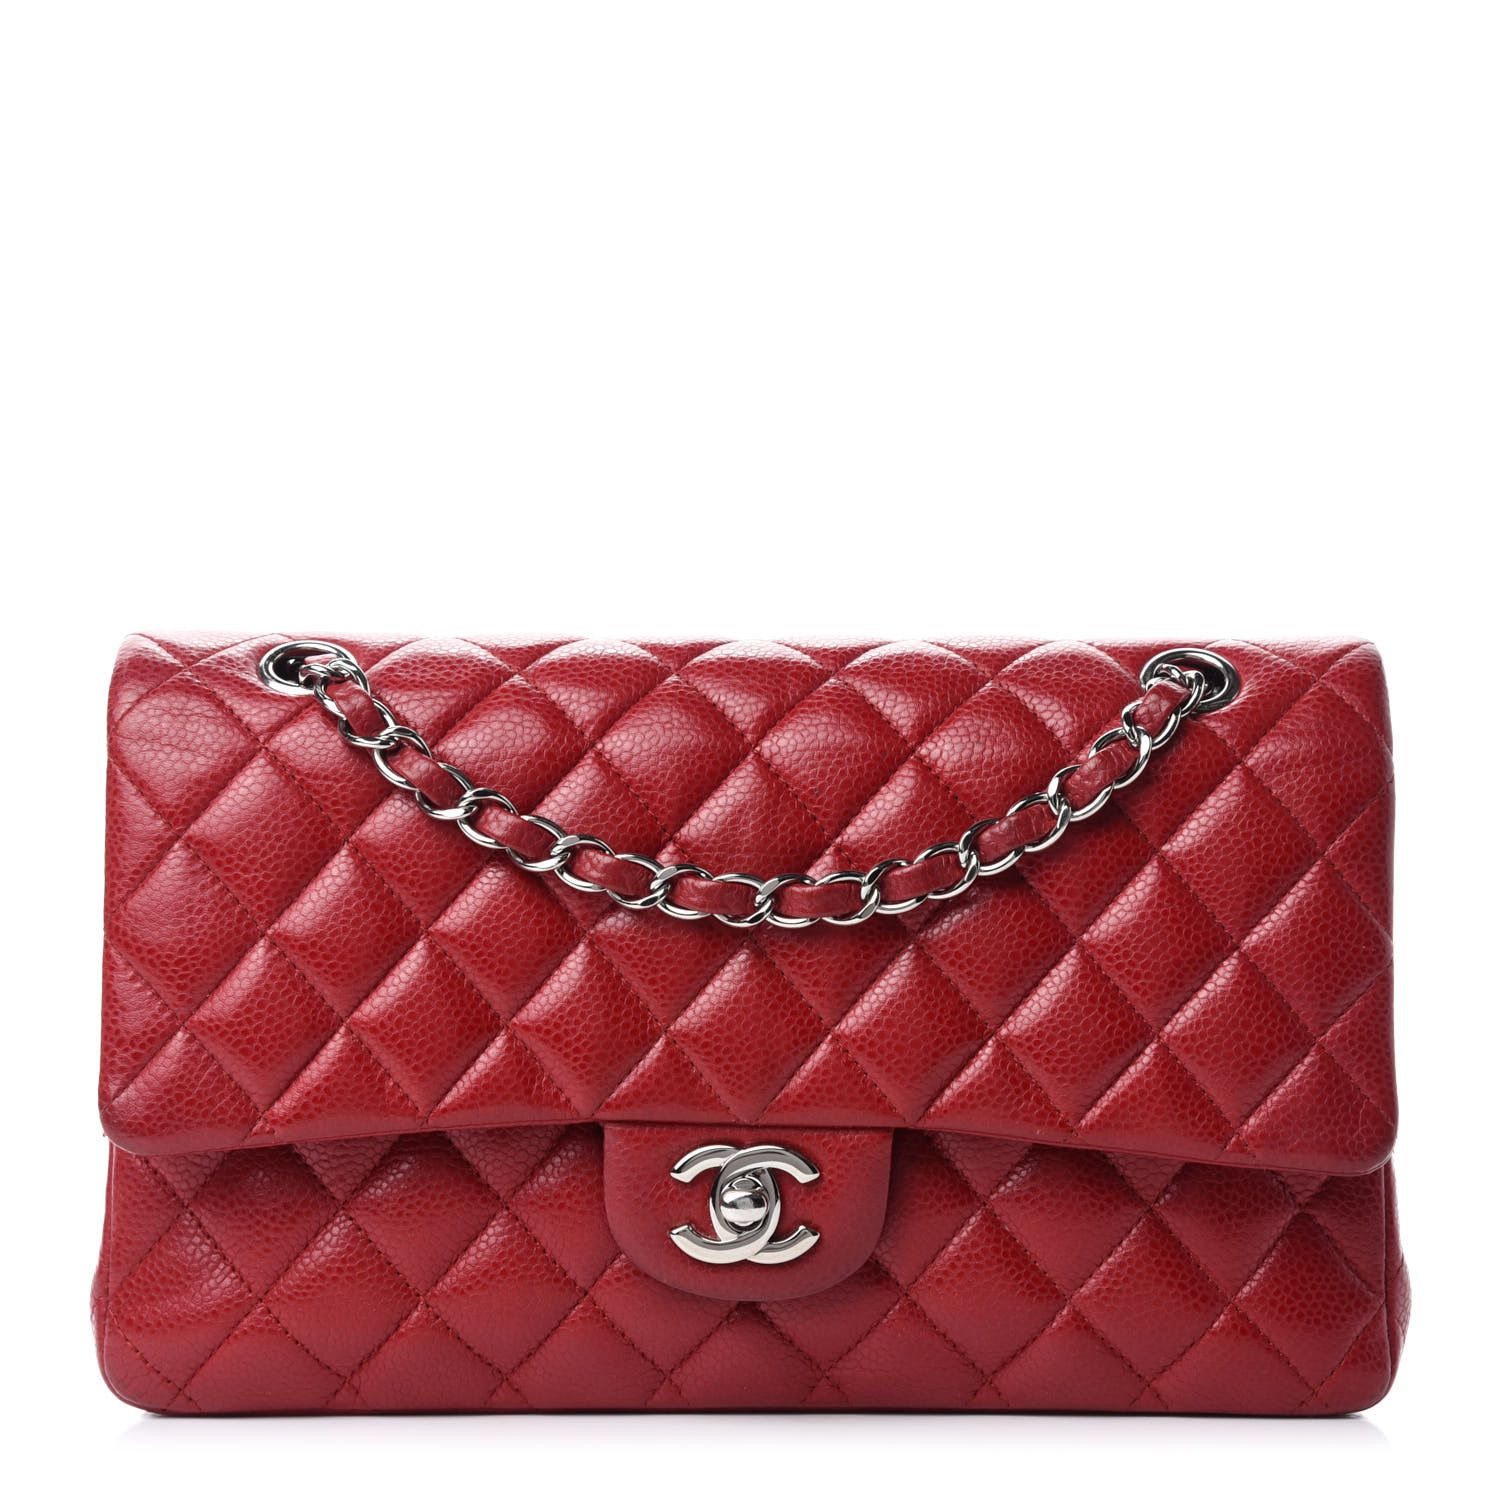 Caviar Quilted Medium Double Flap Red | Fashionphile